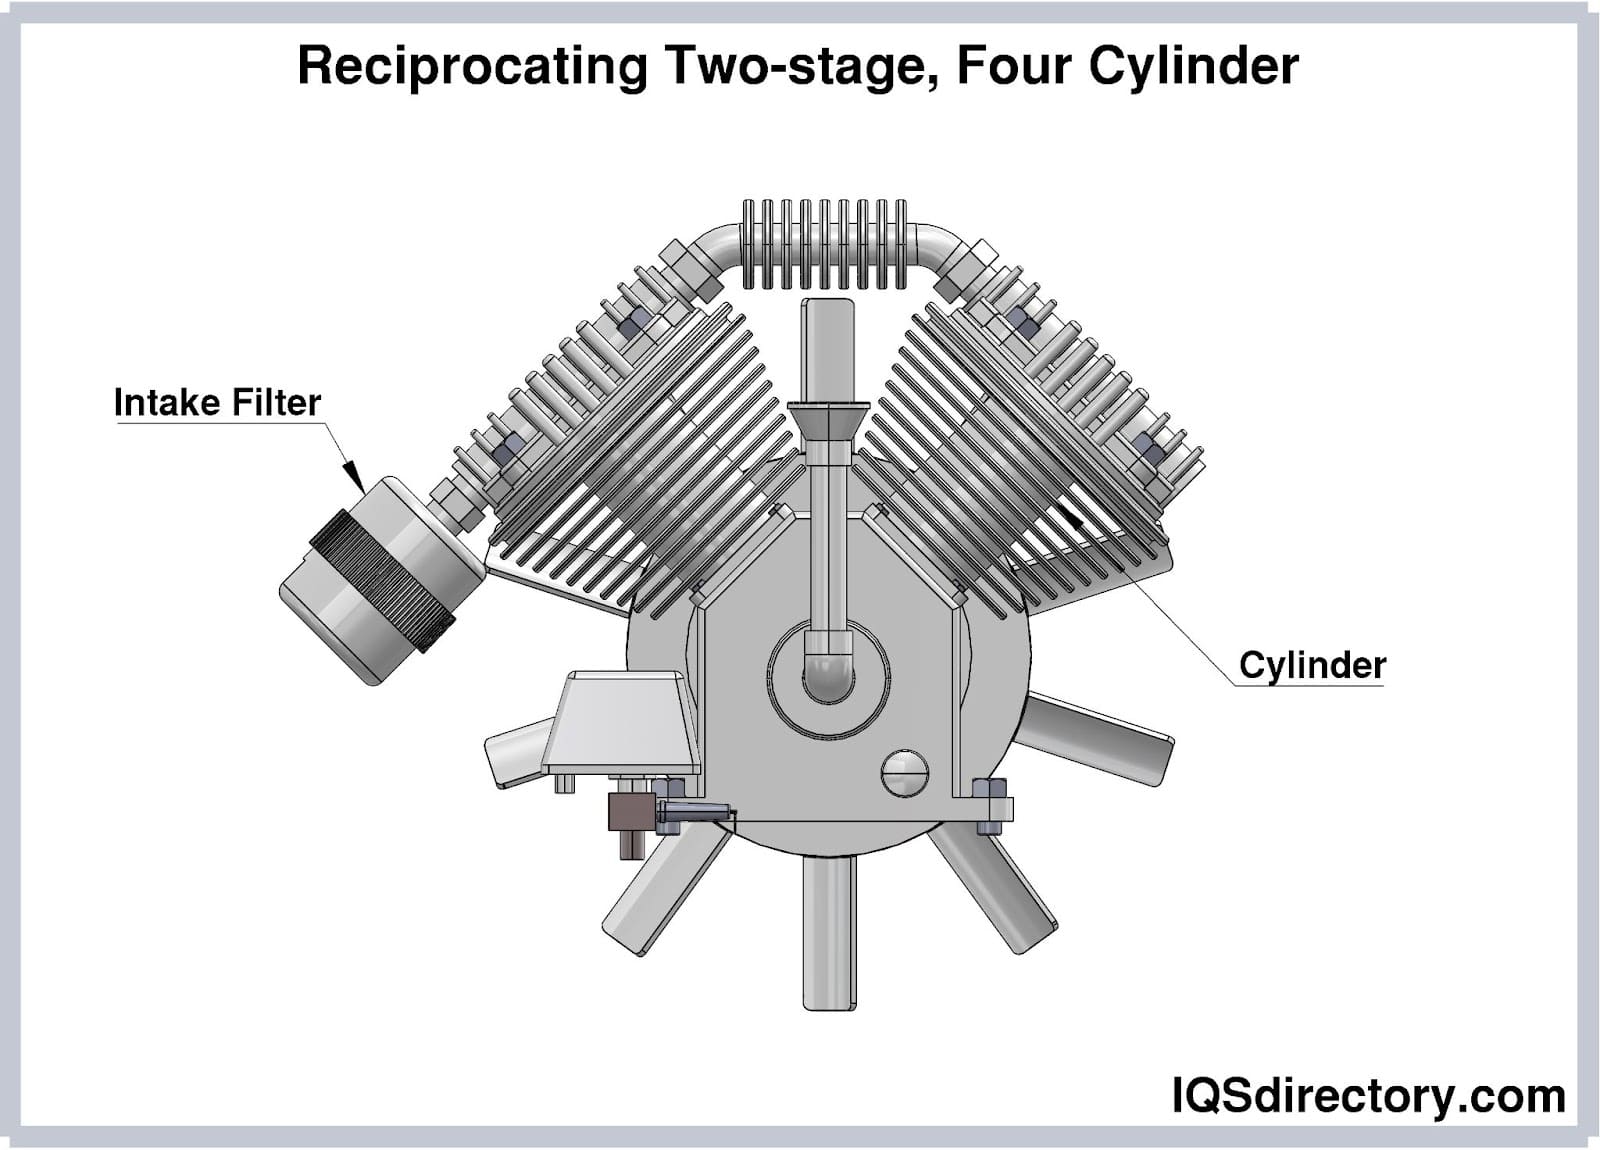 Reciprocating Two-stage, Four Cylinder